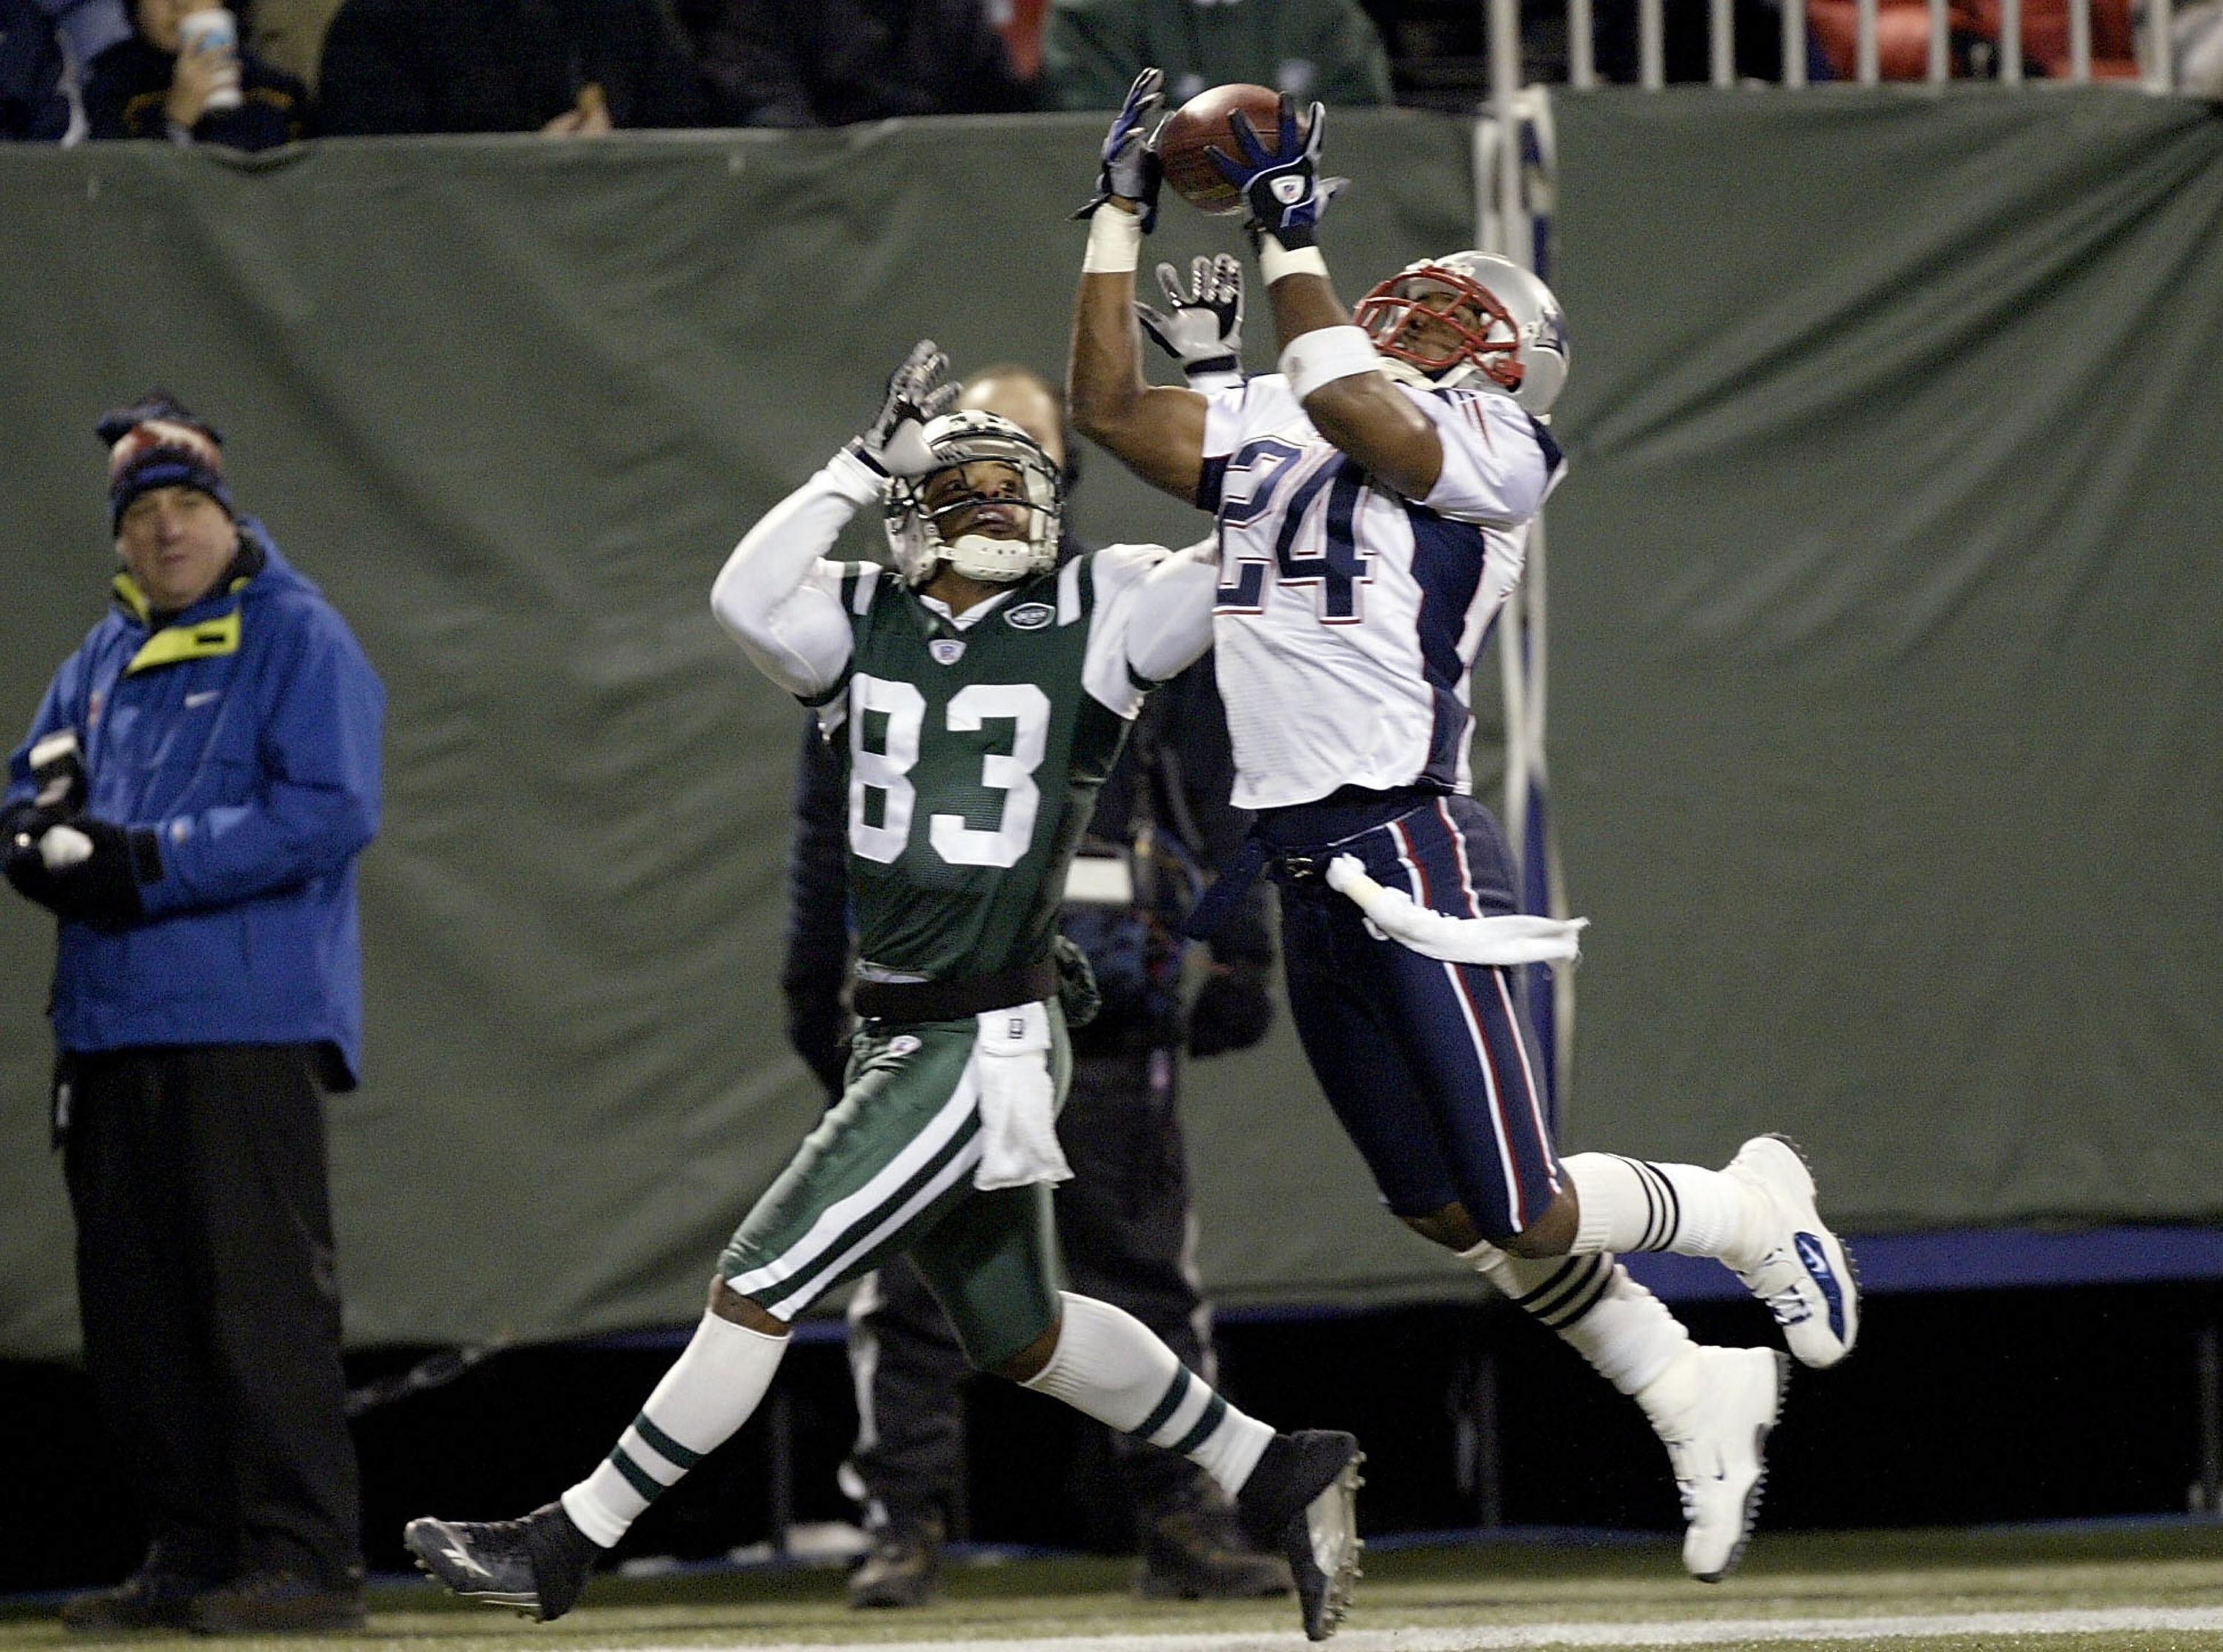 Ty Law of the New England Patriots intercepts a pass intended for Santana Moss of the New York Jets on December 20, 2003. The Patriots won 21-16. (Photo by Ezra Shaw/Getty Images)